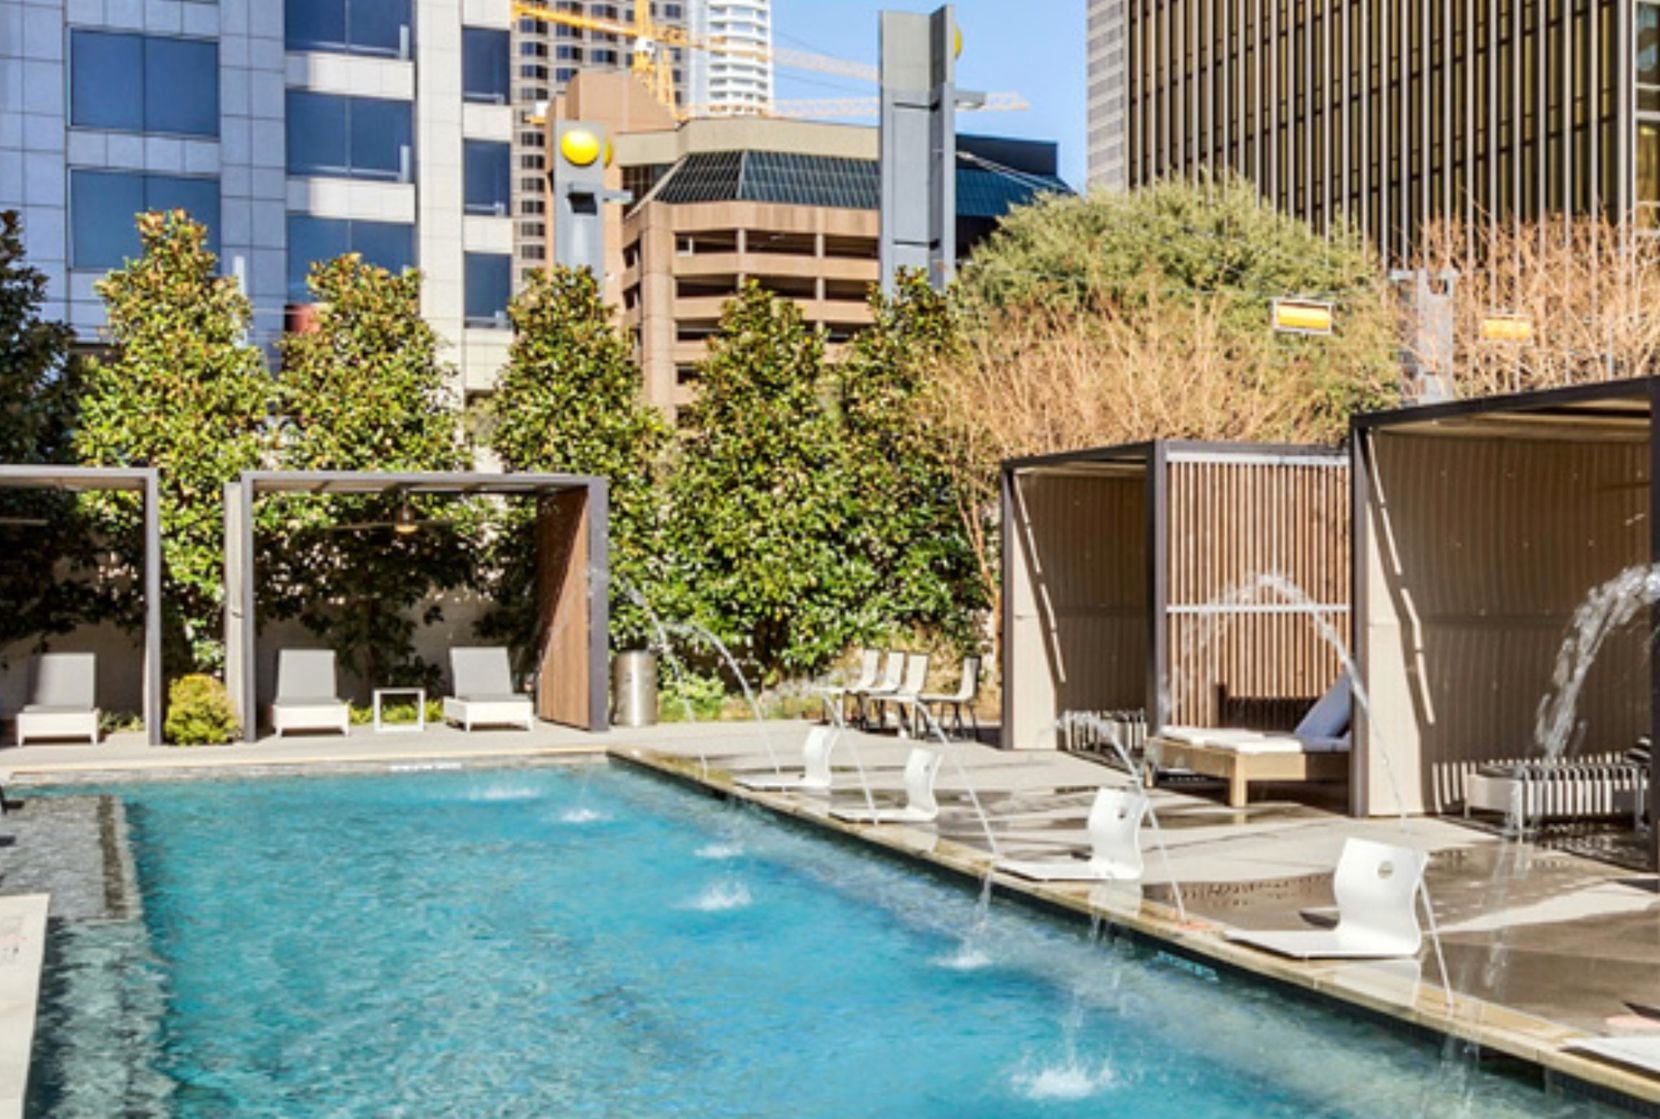 The 276-unit luxury rental community at One Dallas Center includes a ground floor swimming...